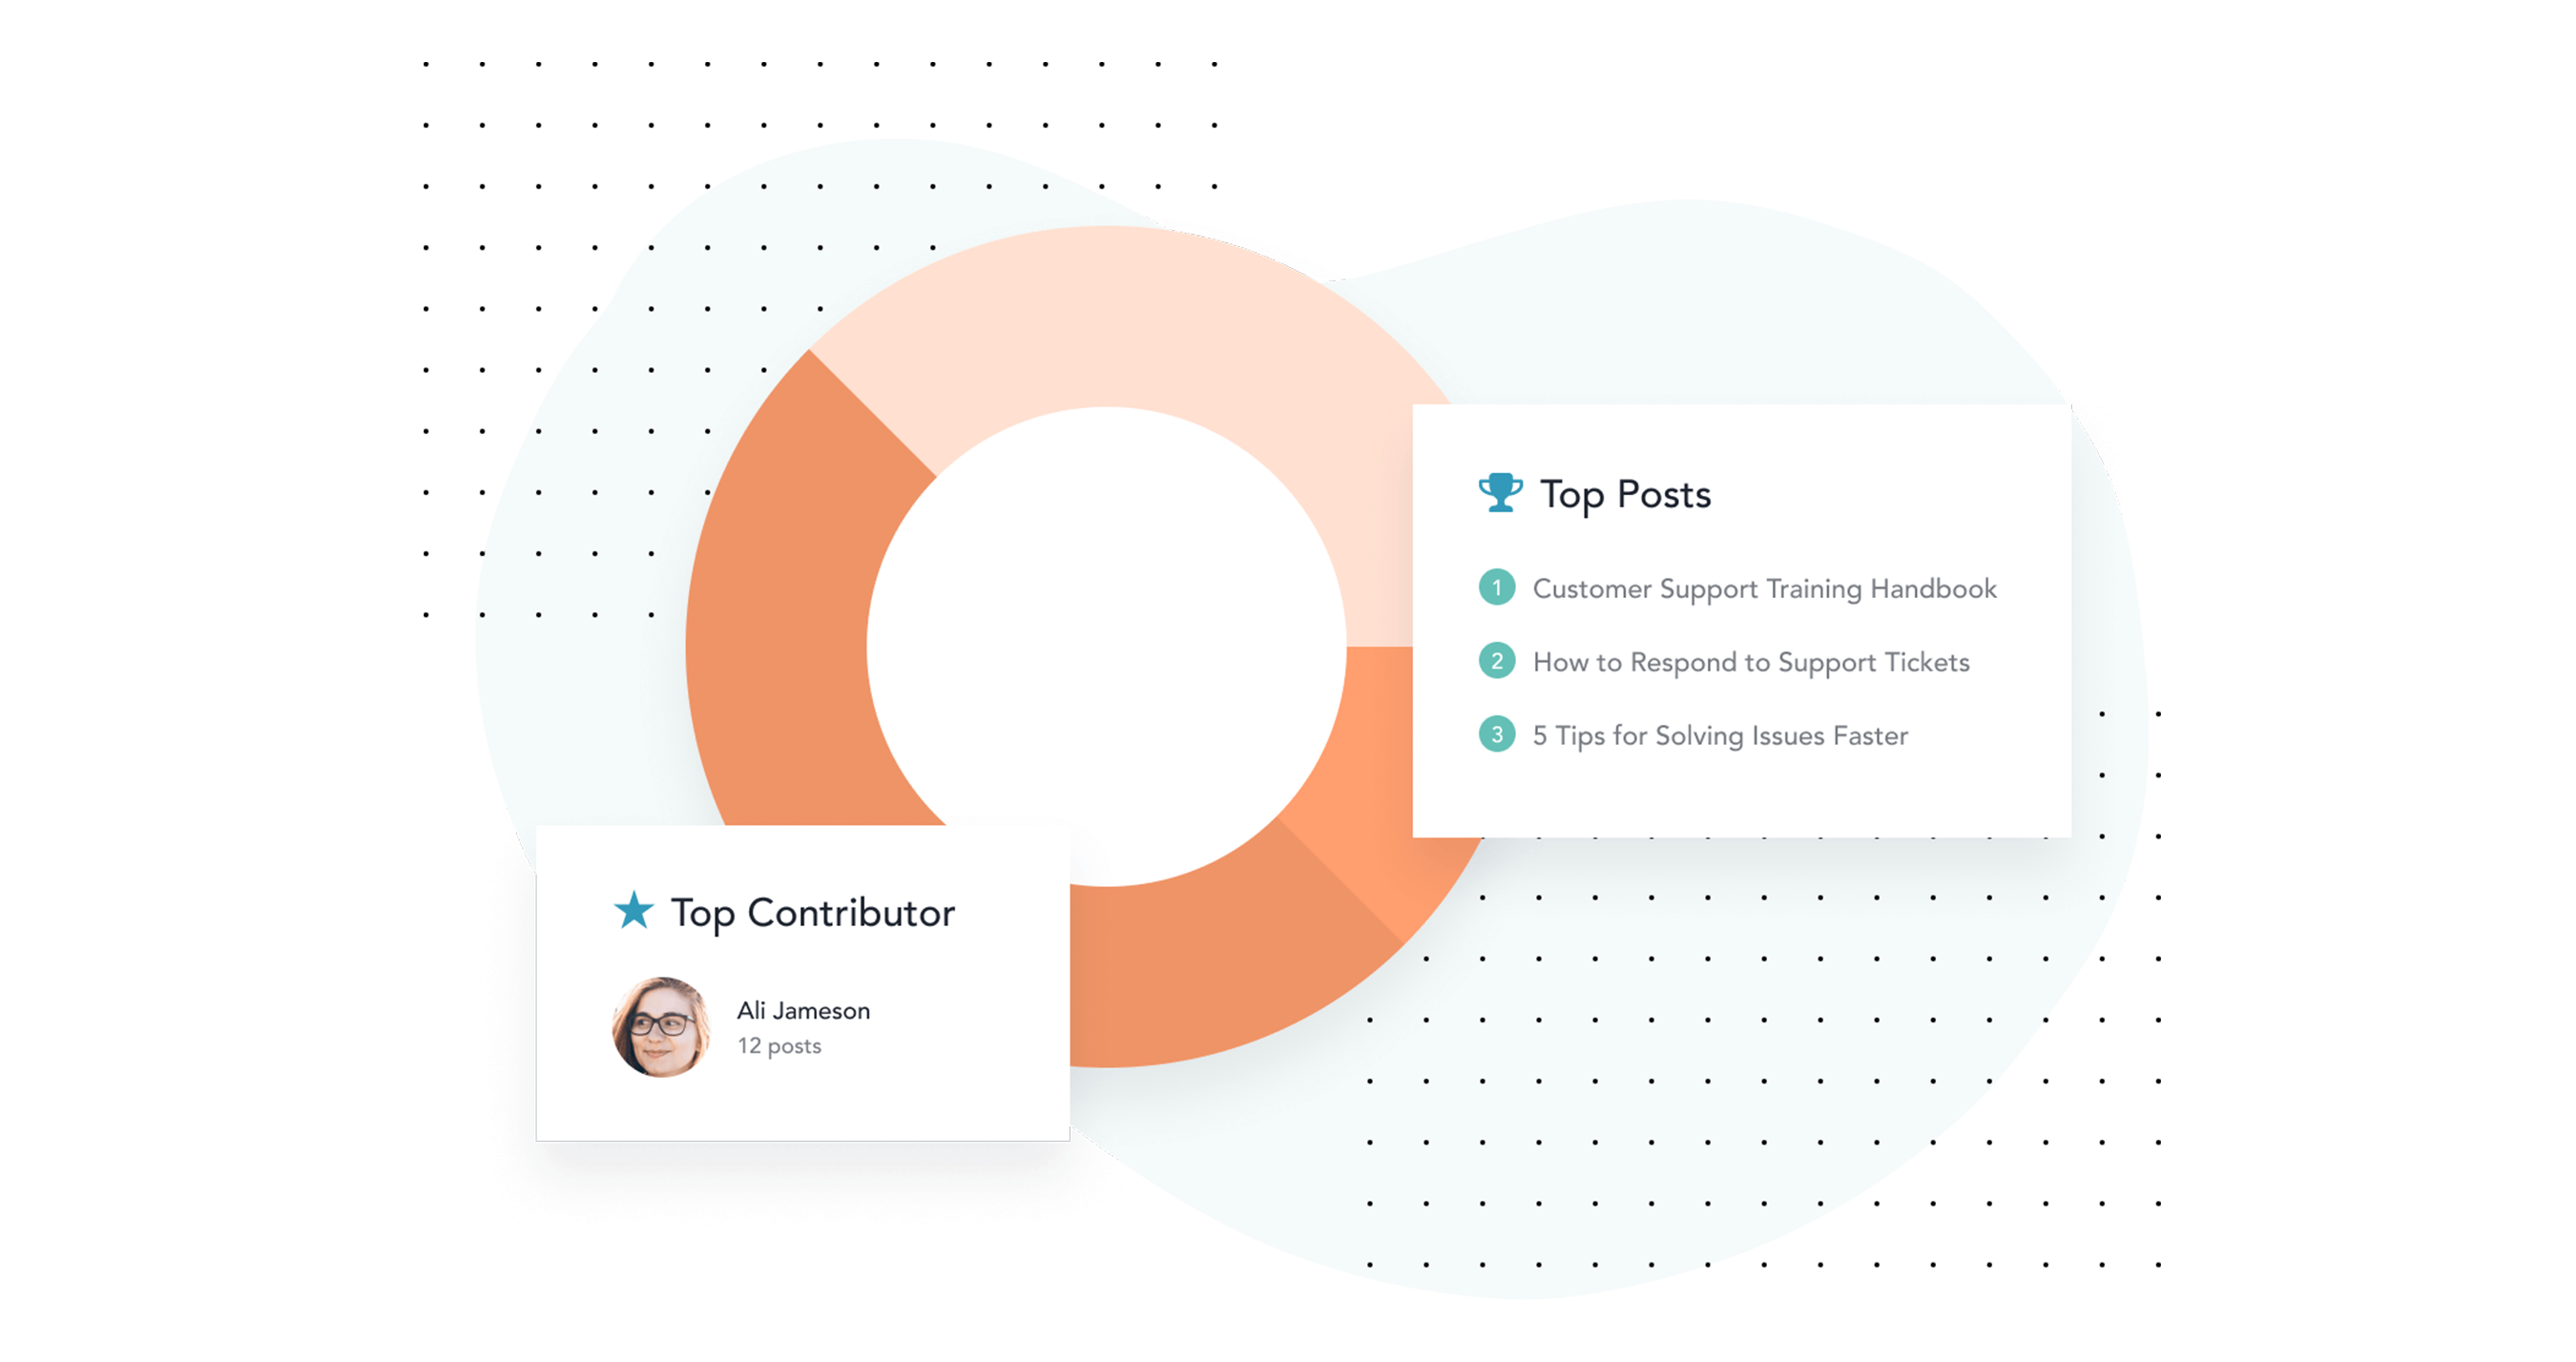 Bloomfire Software - Use built-in analytics to see what content is getting the most engagement, who is viewing individual posts and series, what terms users are searching for, and more.